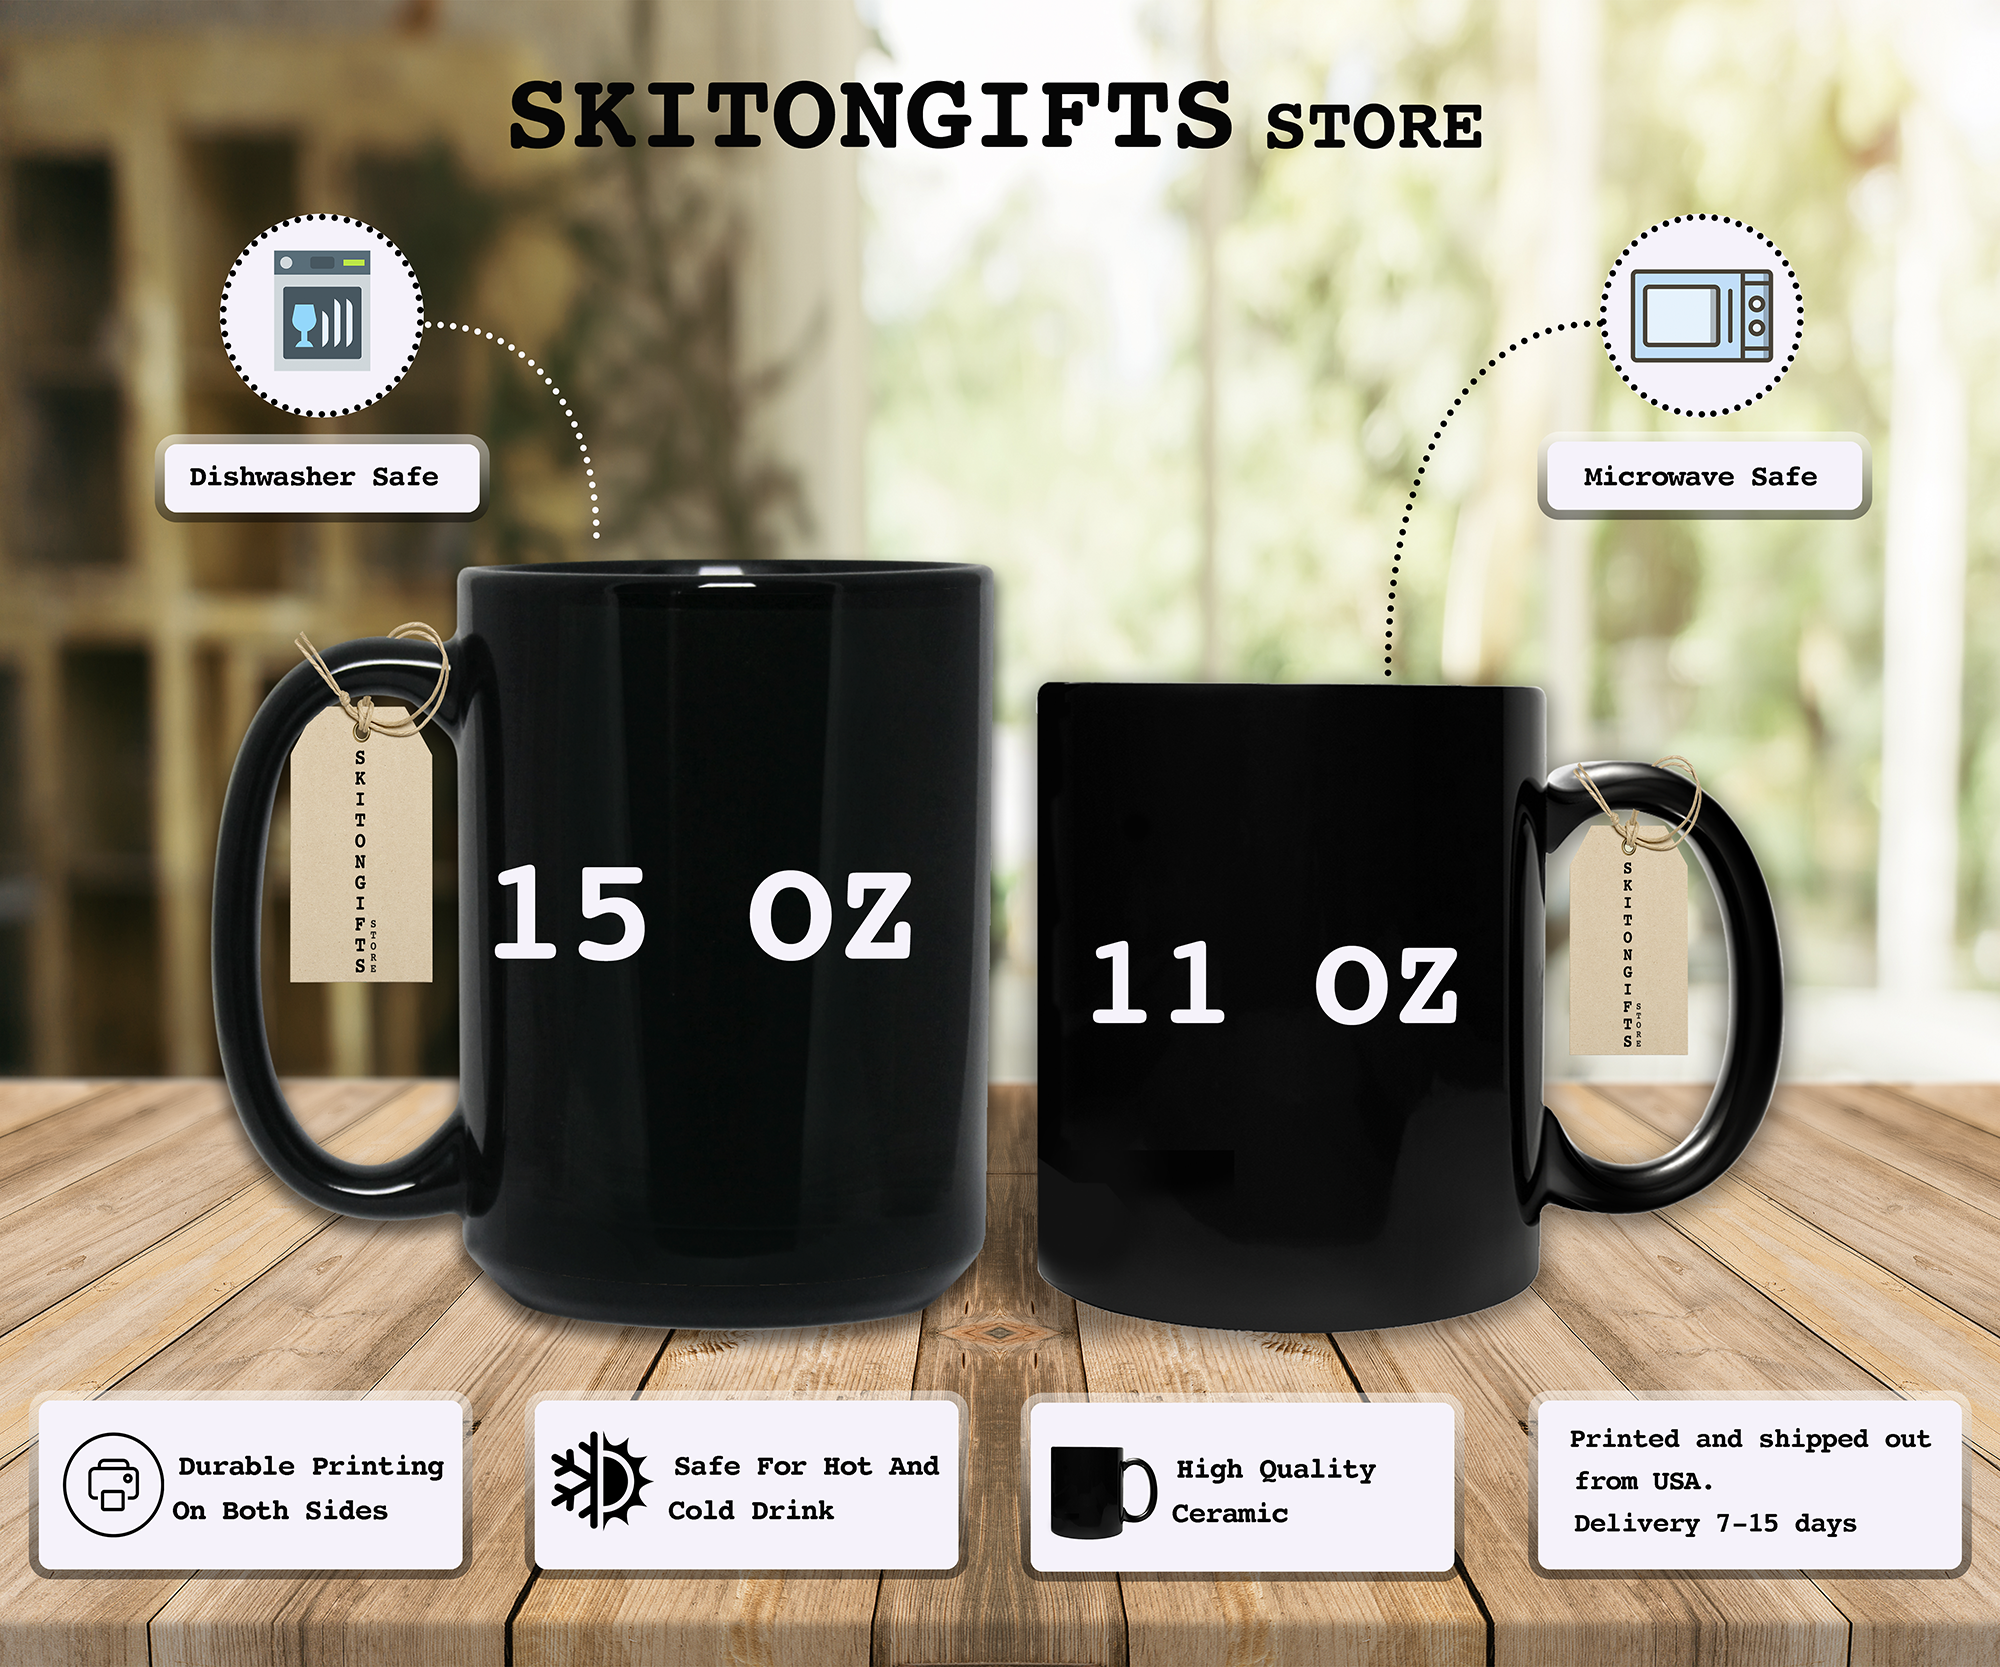 Skitongifts Funny Ceramic Novelty Coffee Mug Being My Boyfriend Is Really The Only You Need  Love You Boyfriend c6dempI